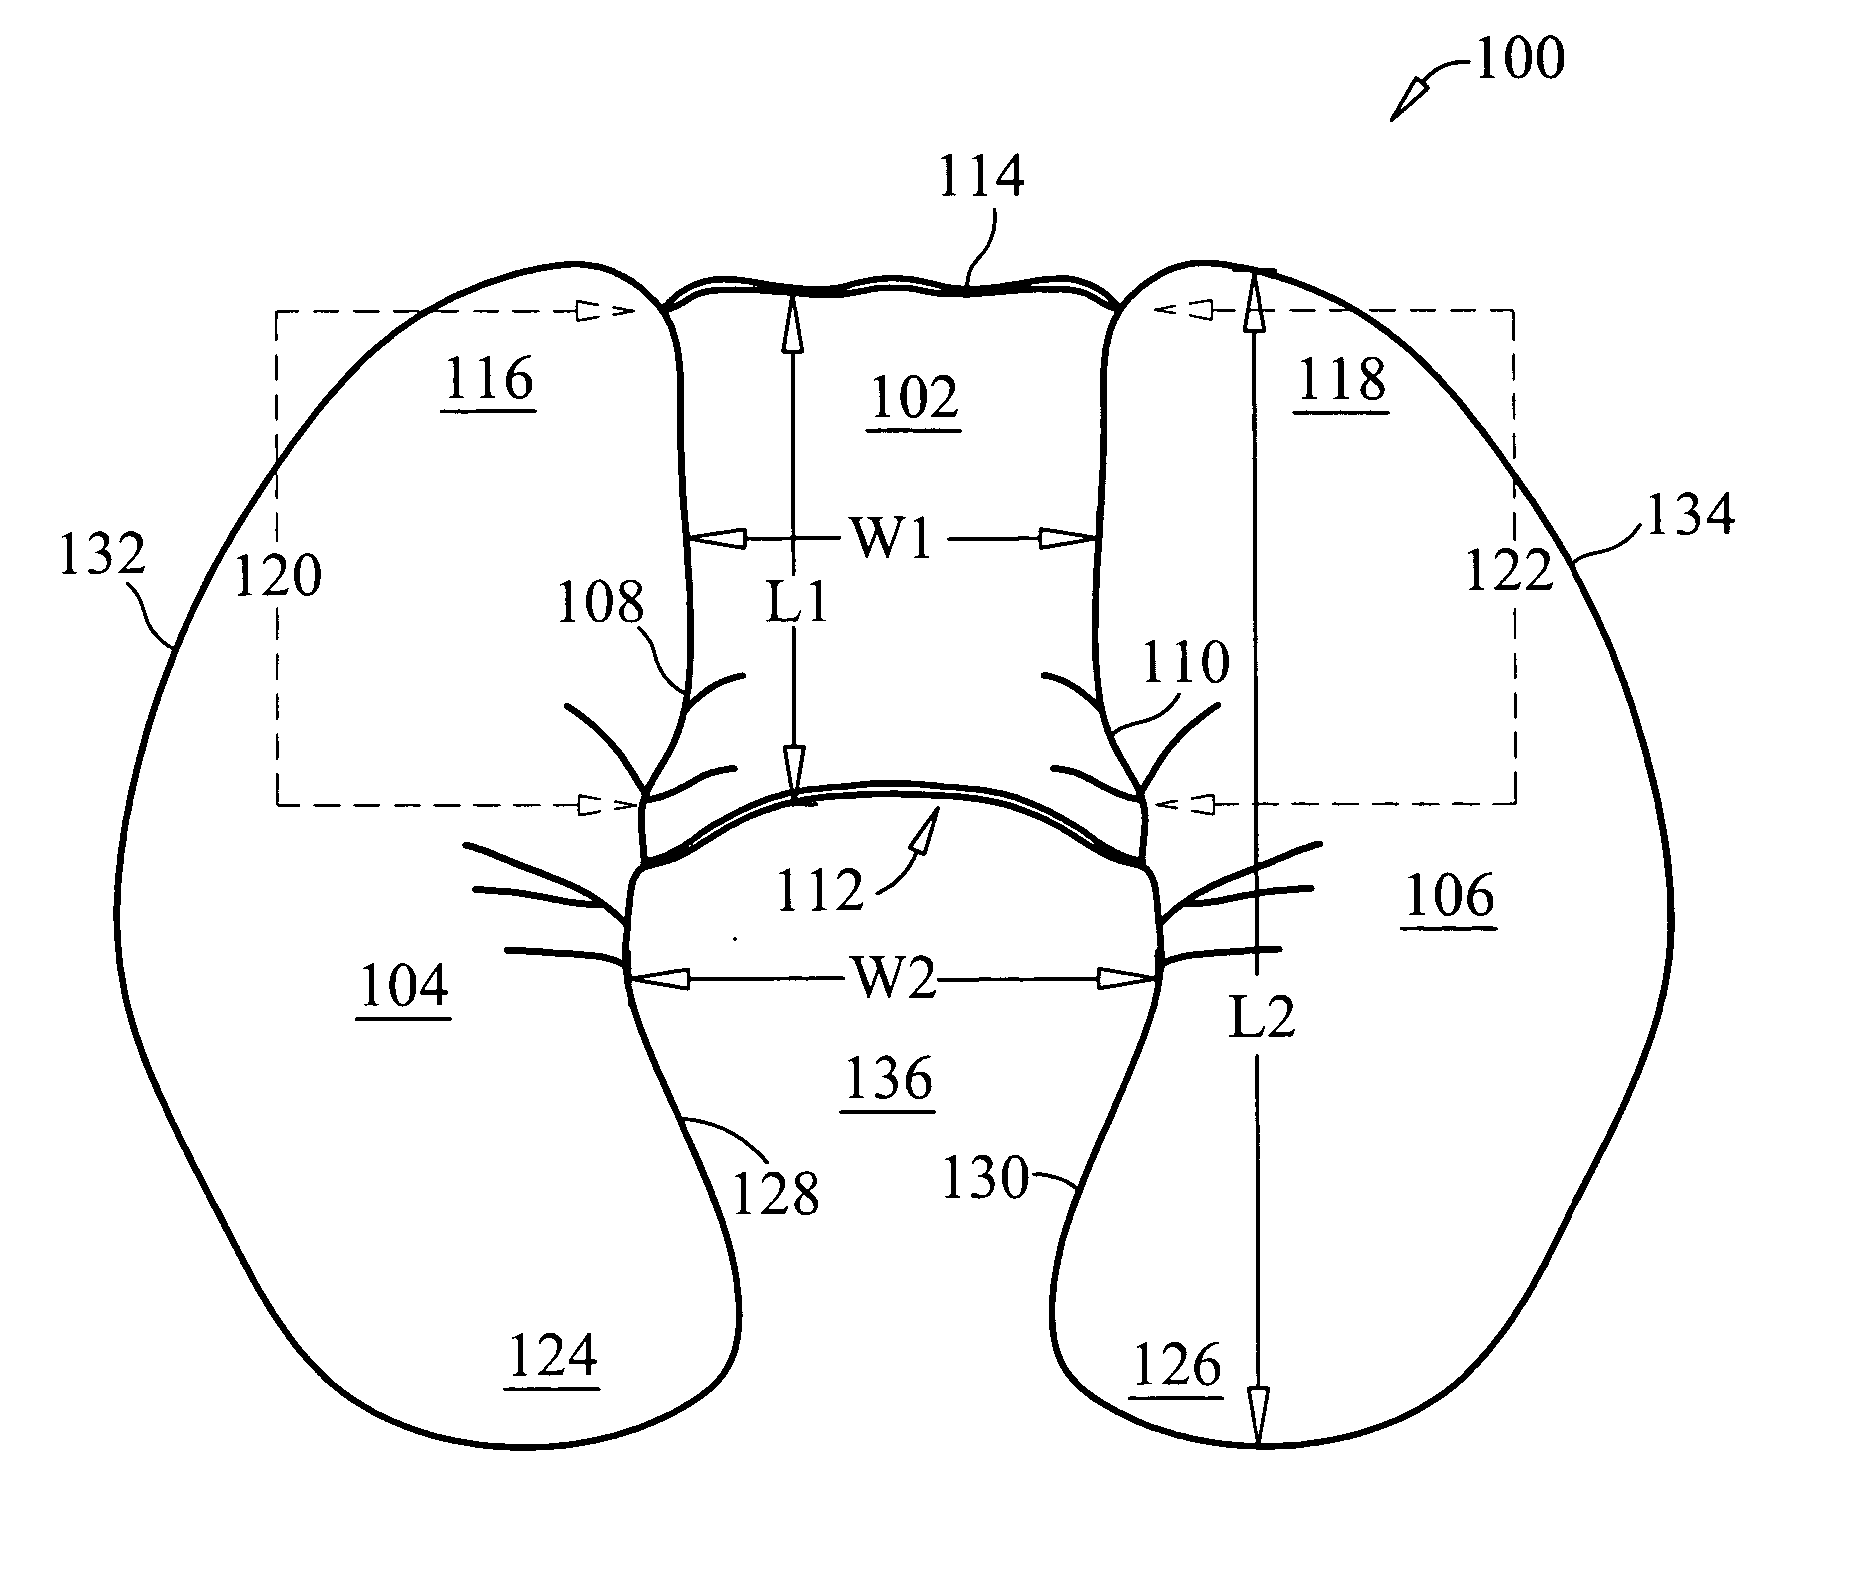 Support device for positioning a patient in a prone position